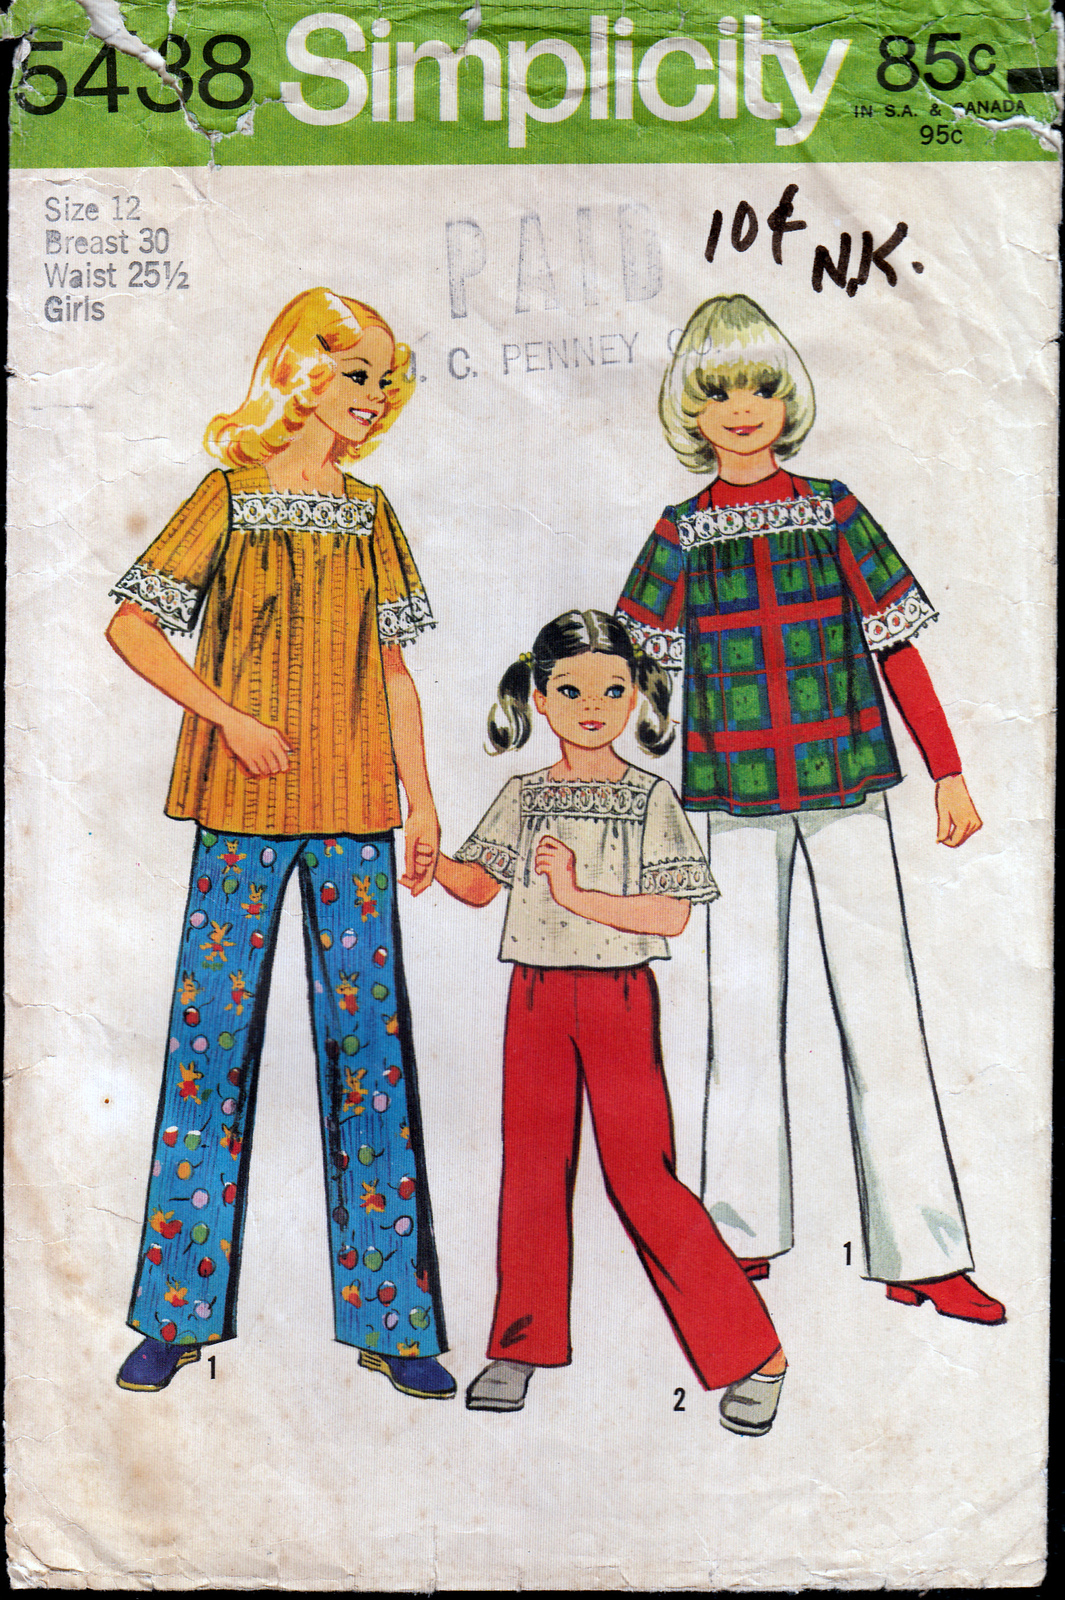 Primary image for Vintage Sewing Pattern 1970 Girl's Smock Top and Pants Simplicity 5438